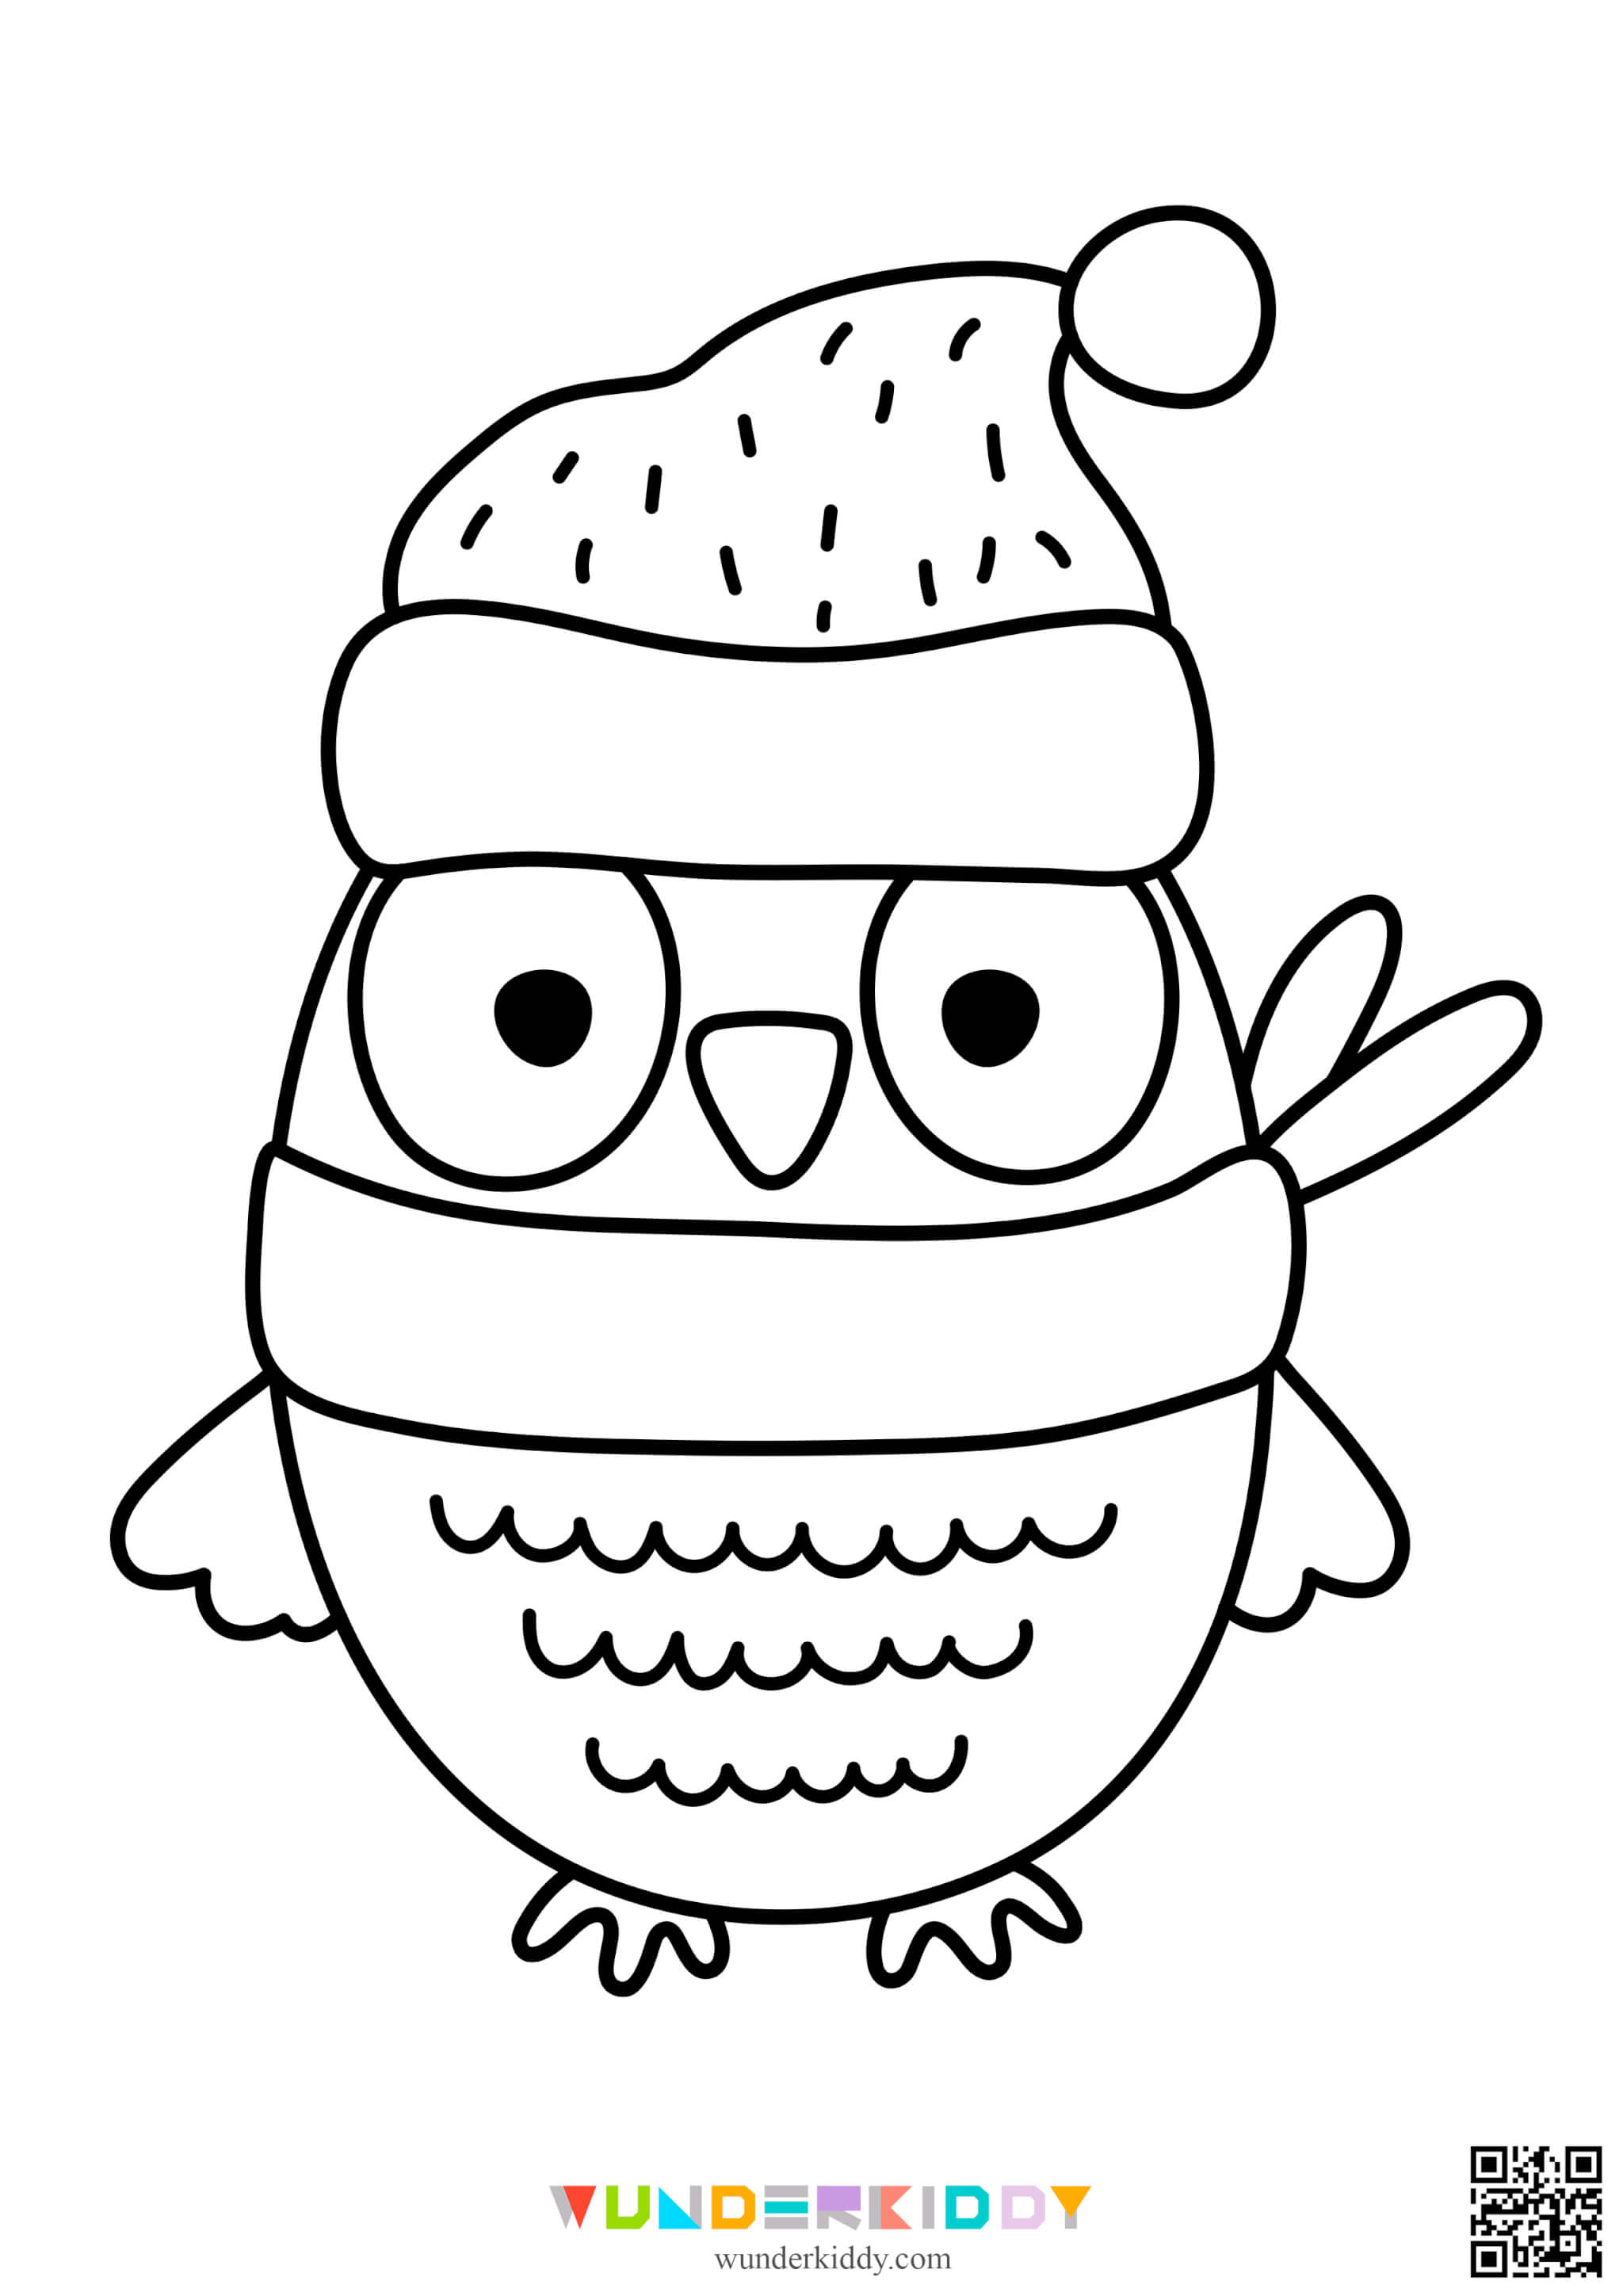 Fall Coloring Pages - Image 4